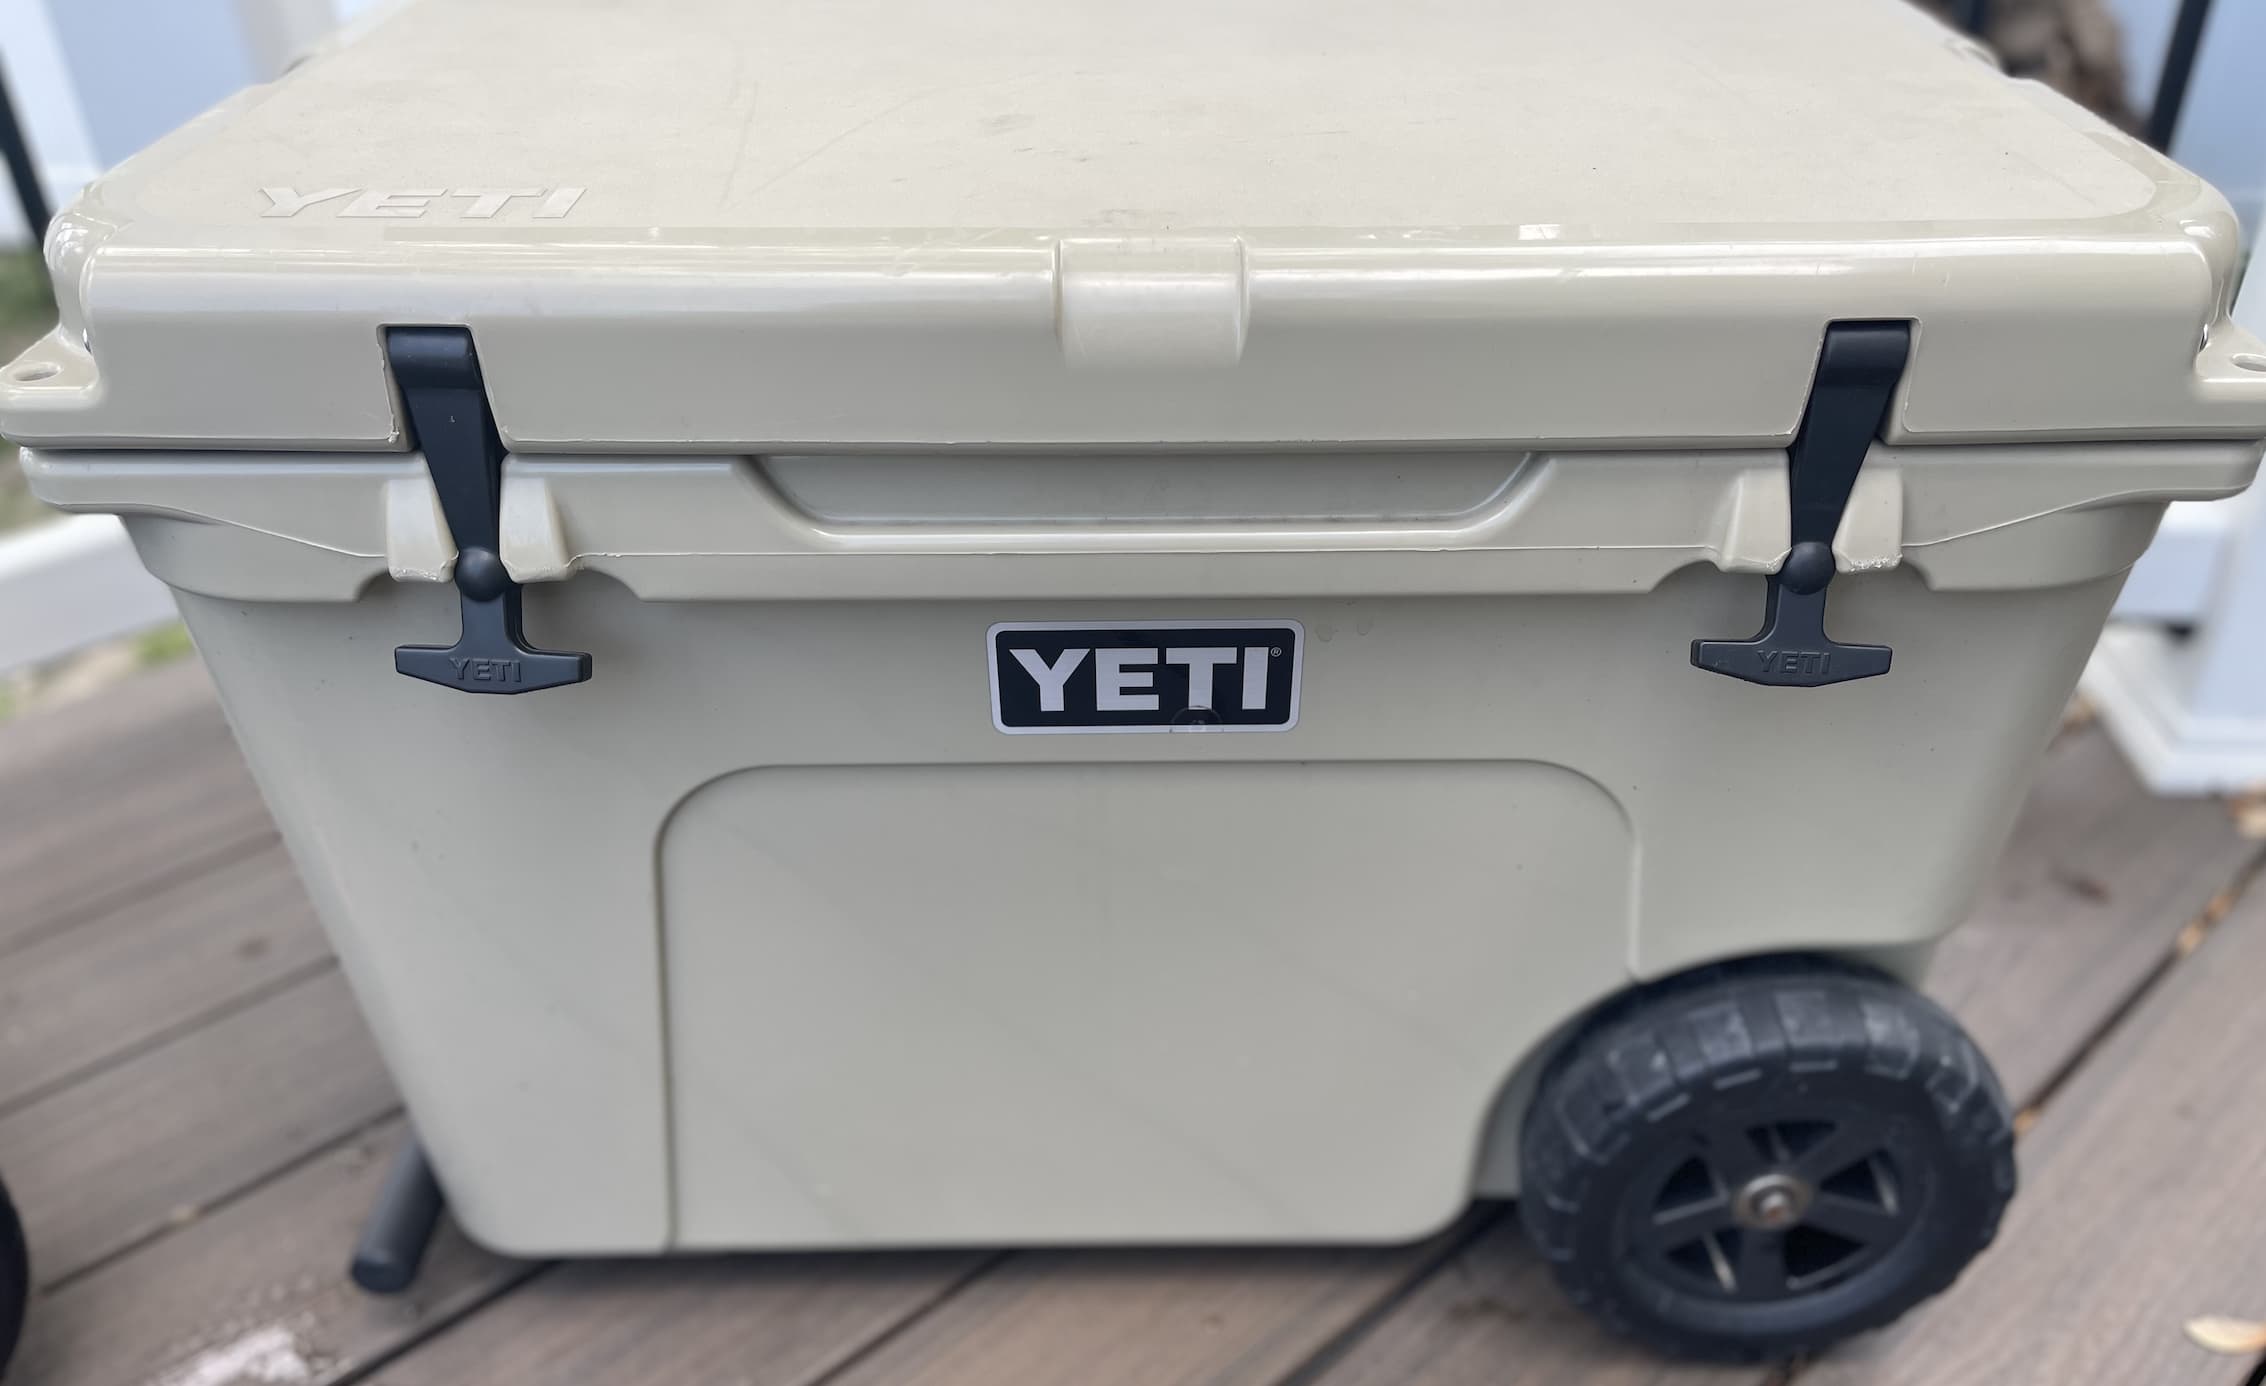 I Left This Yeti Cooler in 107-Degree Heat All Day, and Everything